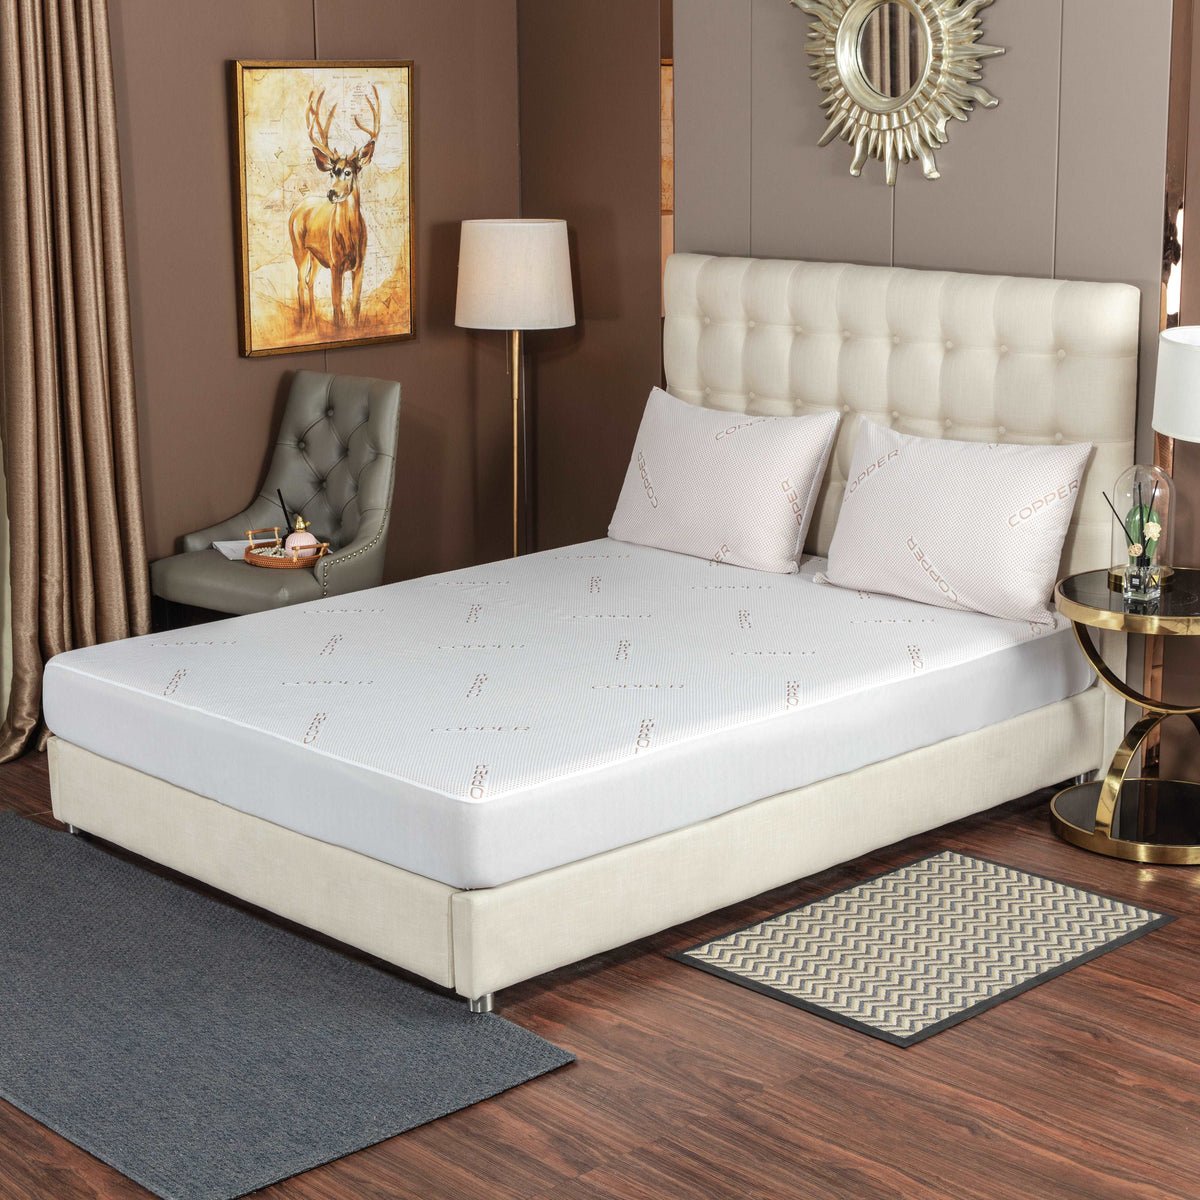 Copper Infused Waterproof Mattress Protector.